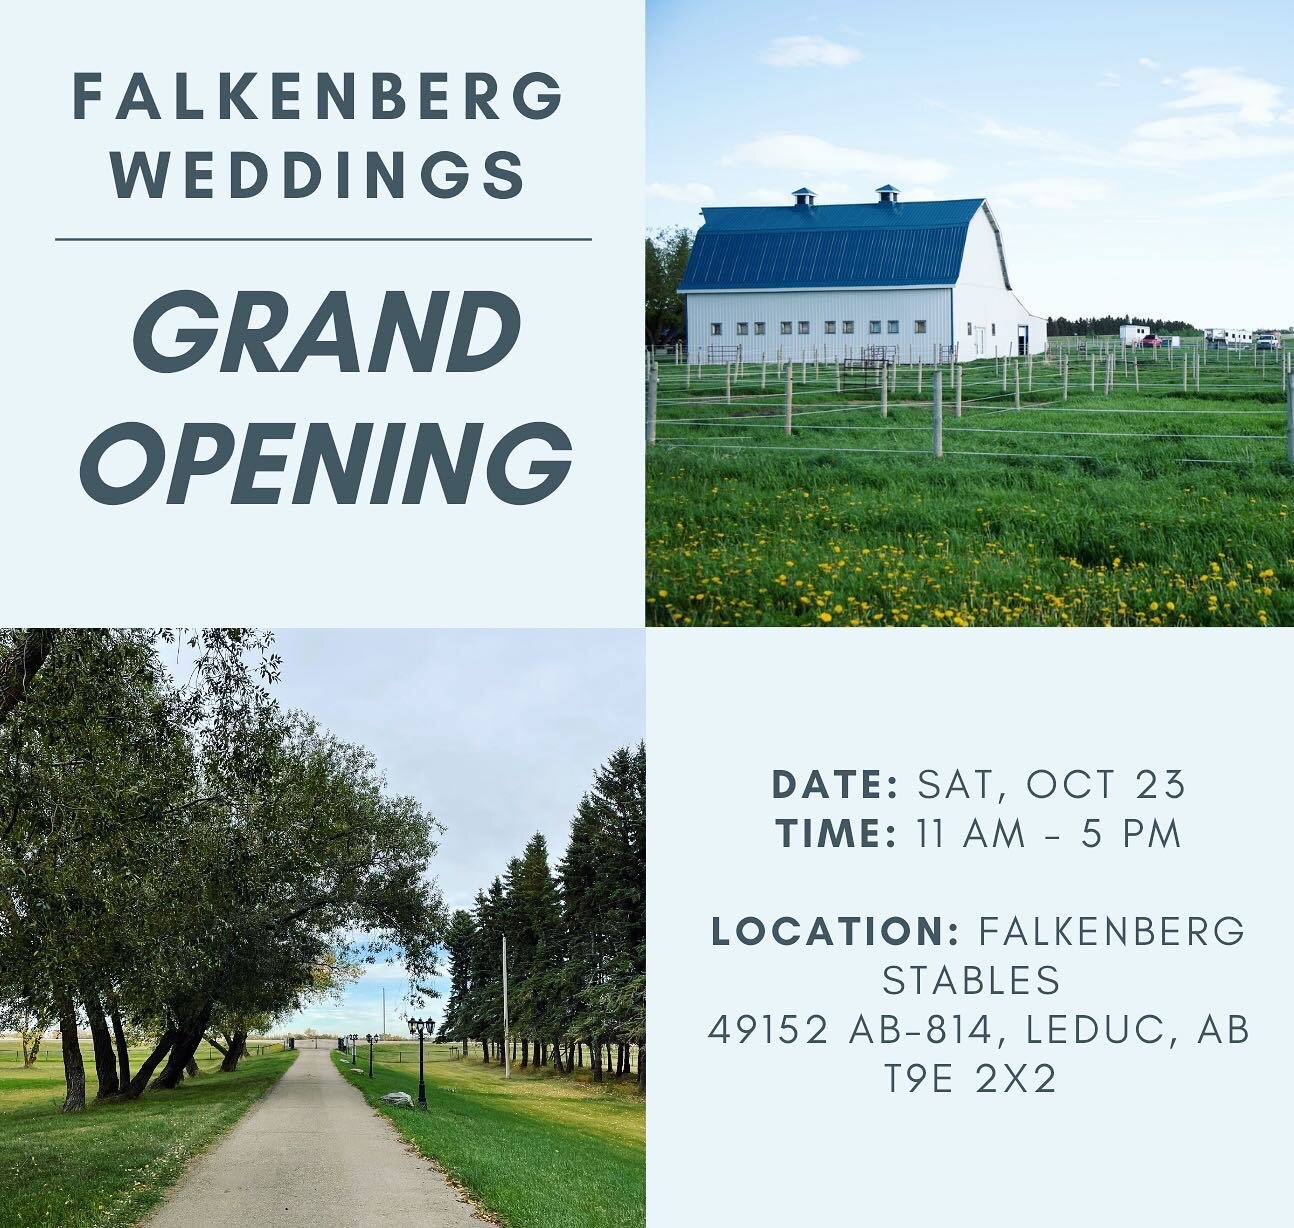 Save the date! 🤩 Join us in celebrating the opening of our romantic 1917 wedding barn overlooking a private equestrian facility. 

Stop by anytime on Sat, Oct 23 for a facility tour, vendor booths, food &amp; drinks and more! 💕